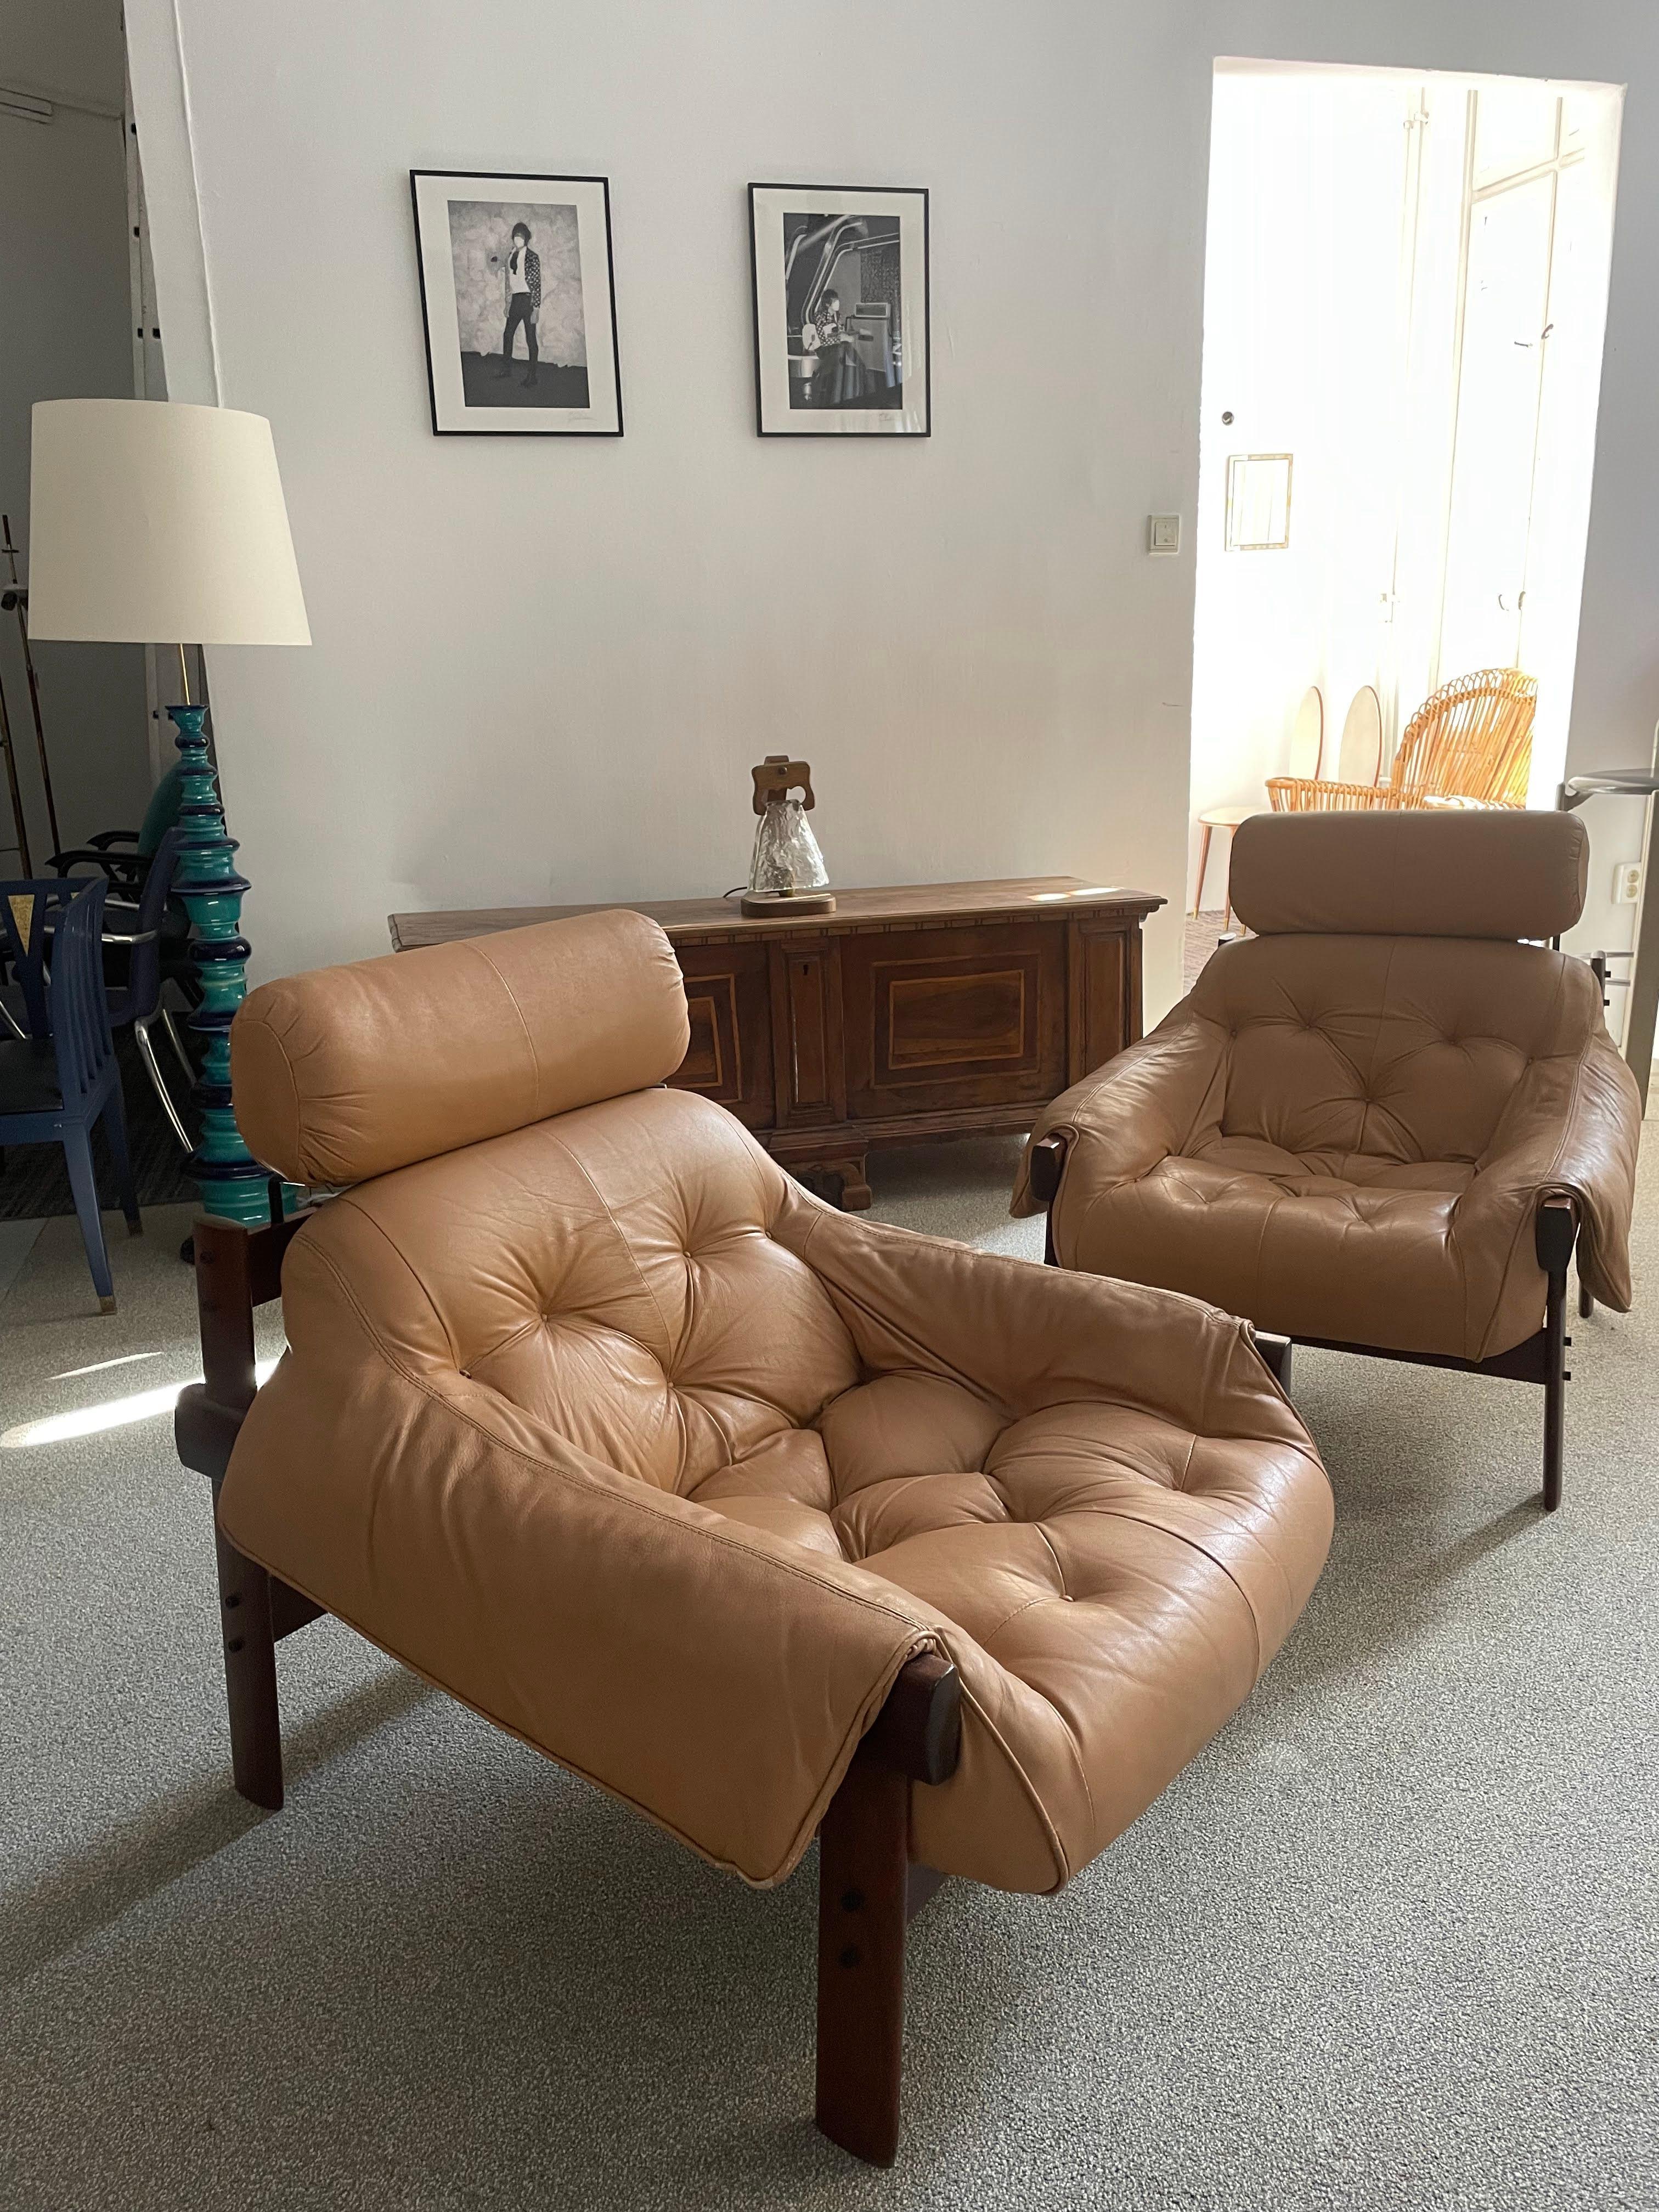 Stunning tufted leather lounge chair with Jatobah frame and original leather upholstery, designed by Percival Lafer and manufactured by Lafer Furniture, Brazil, during the 1960s. Light wear and patina consistent with age and use.